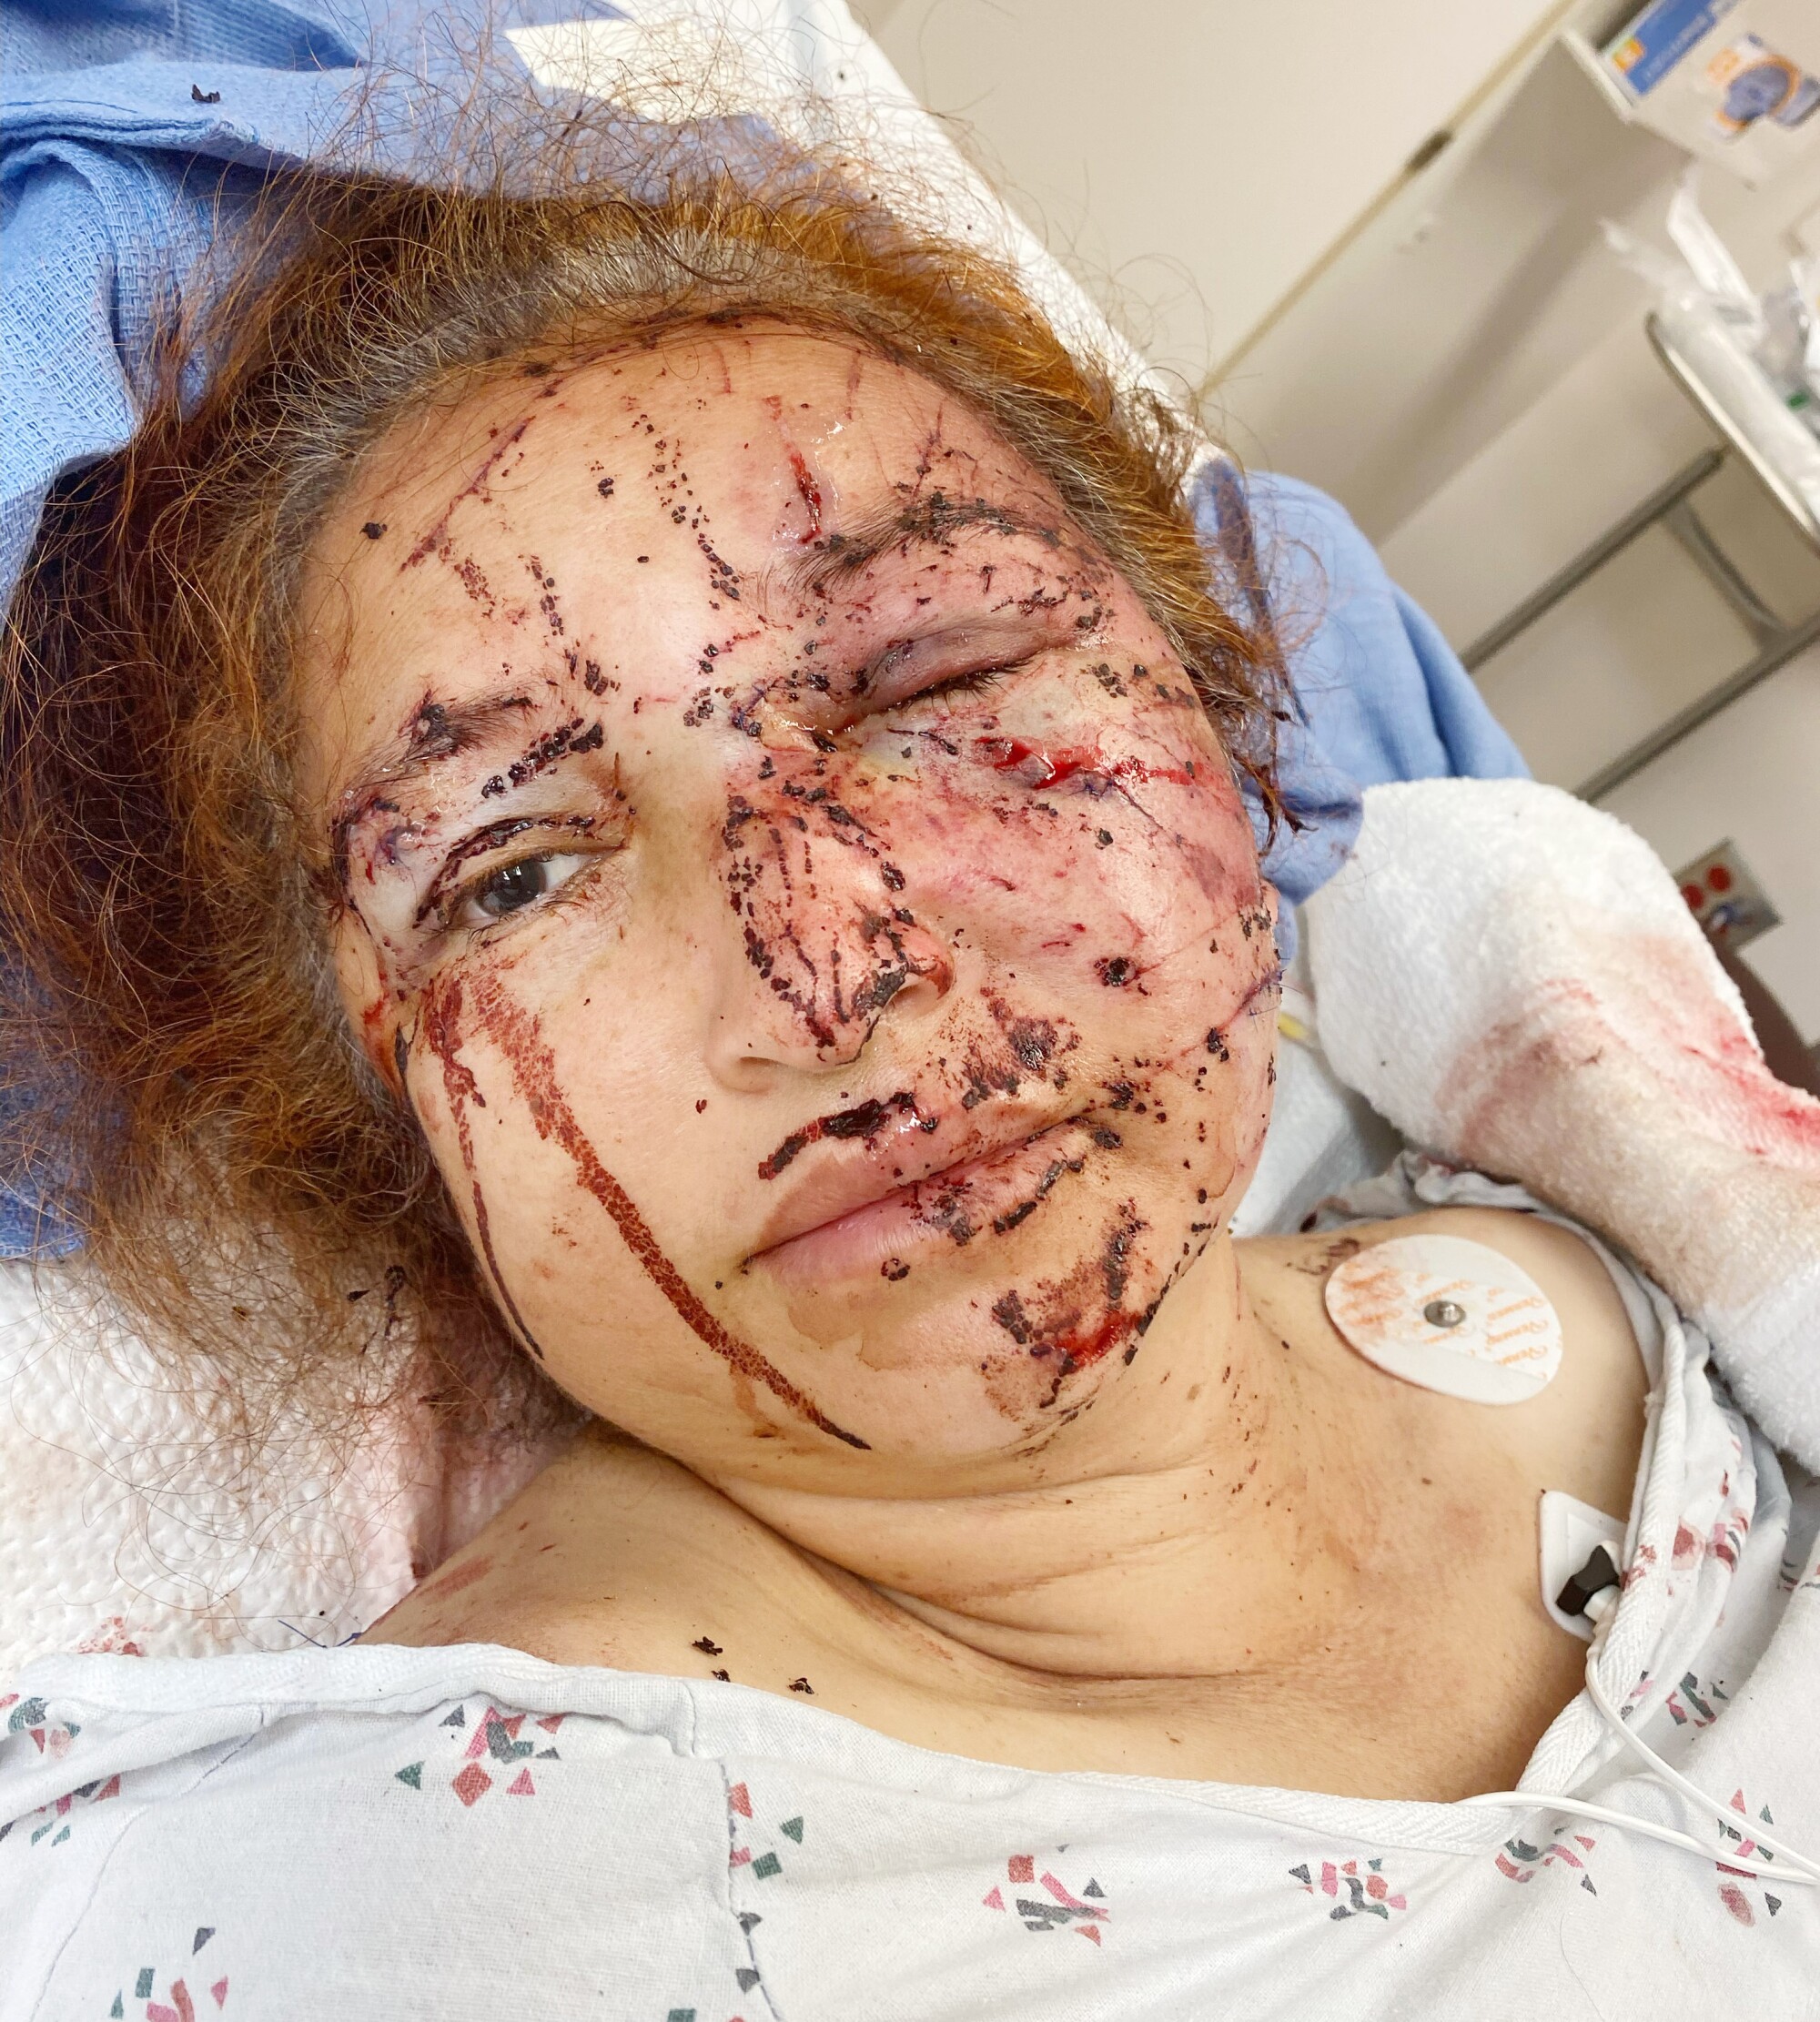 A woman in a hospital gown with cuts and blood on her face